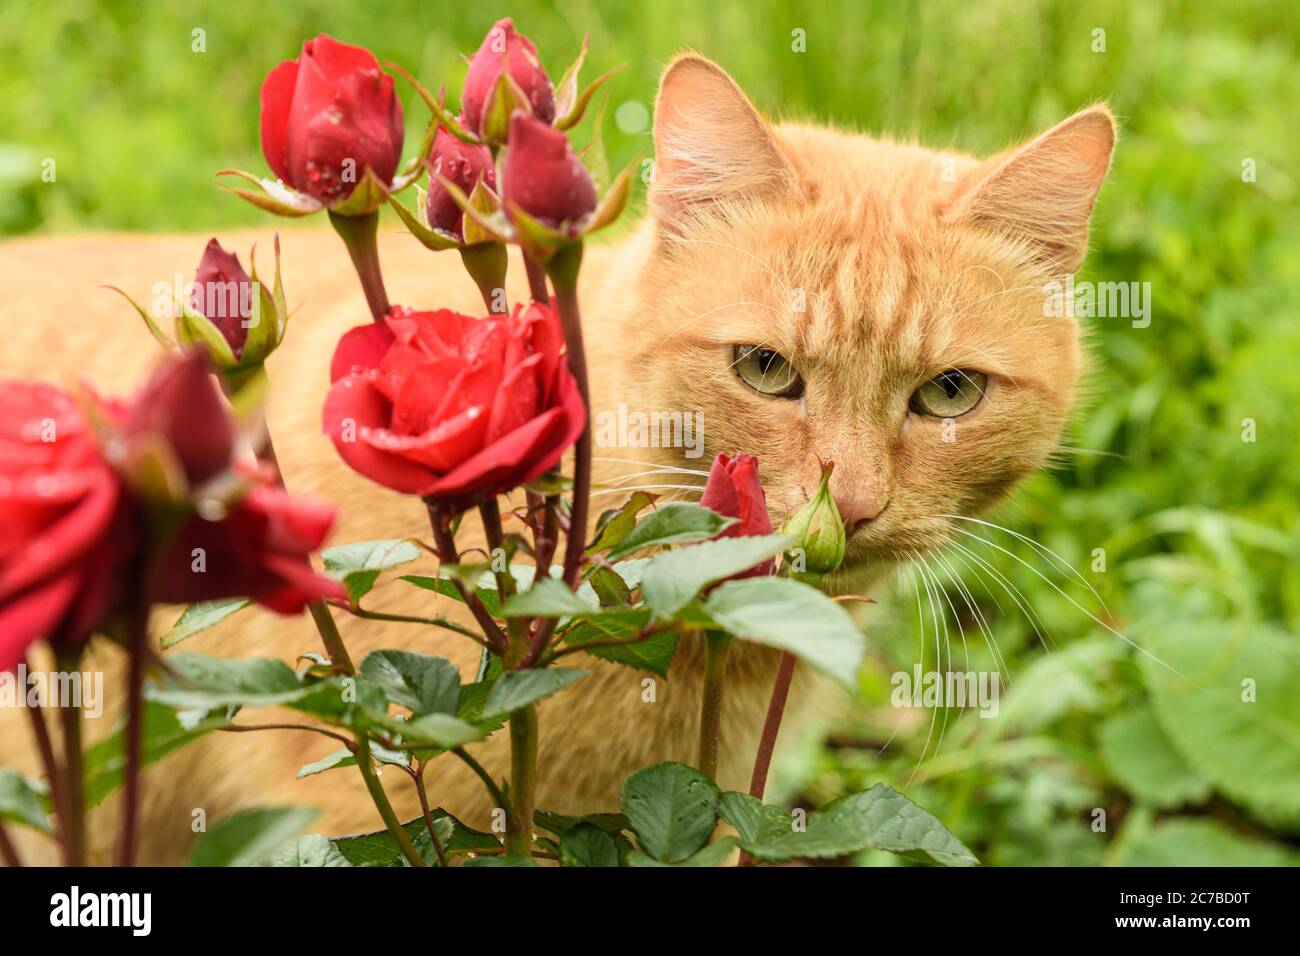 Red cat among red roses in the garden Stock Photo